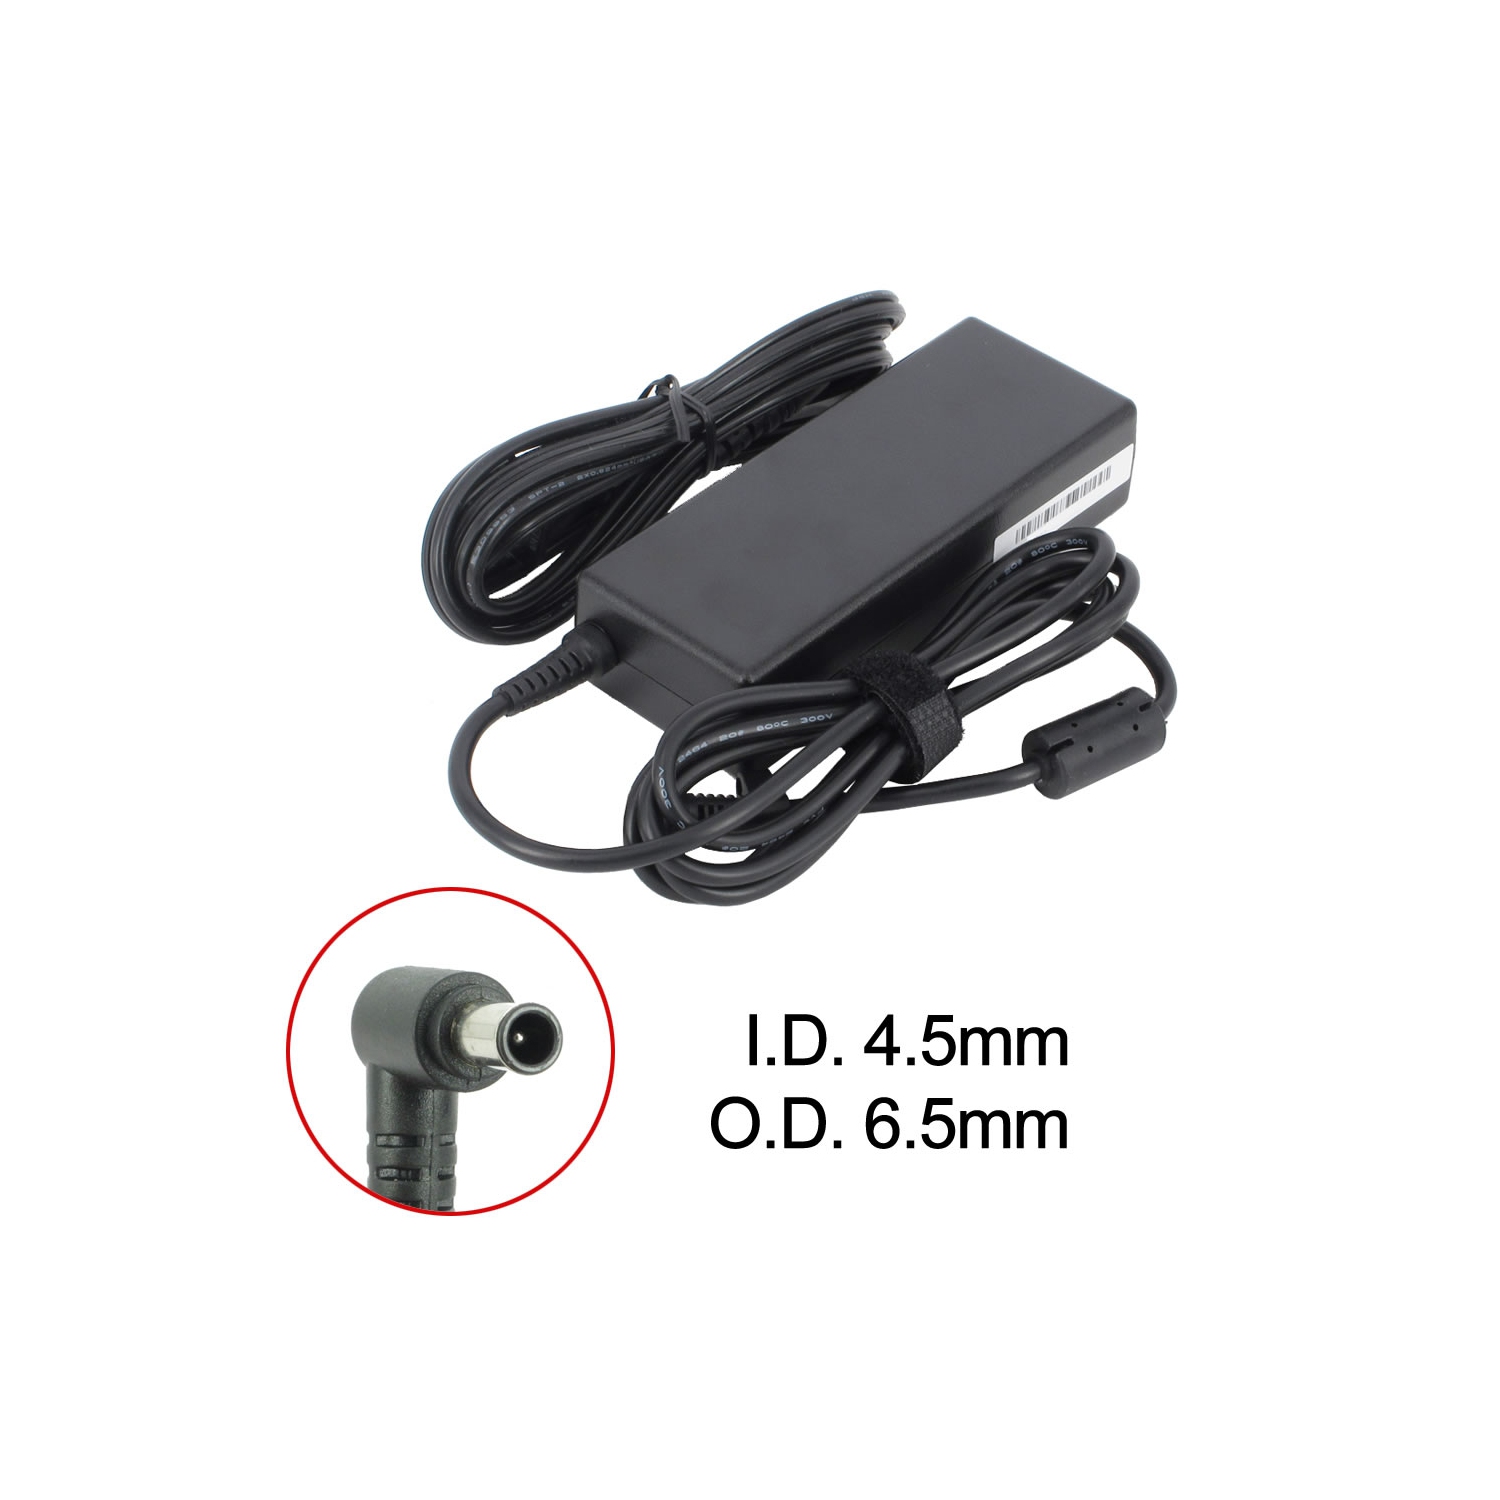 Brand New Laptop AC Adapter for LG XNOTE CD400, ADP-90TH A, PCGA-AC19V19, VGP-AC19V14, VGP-AC19V26, VGP-AC19V43